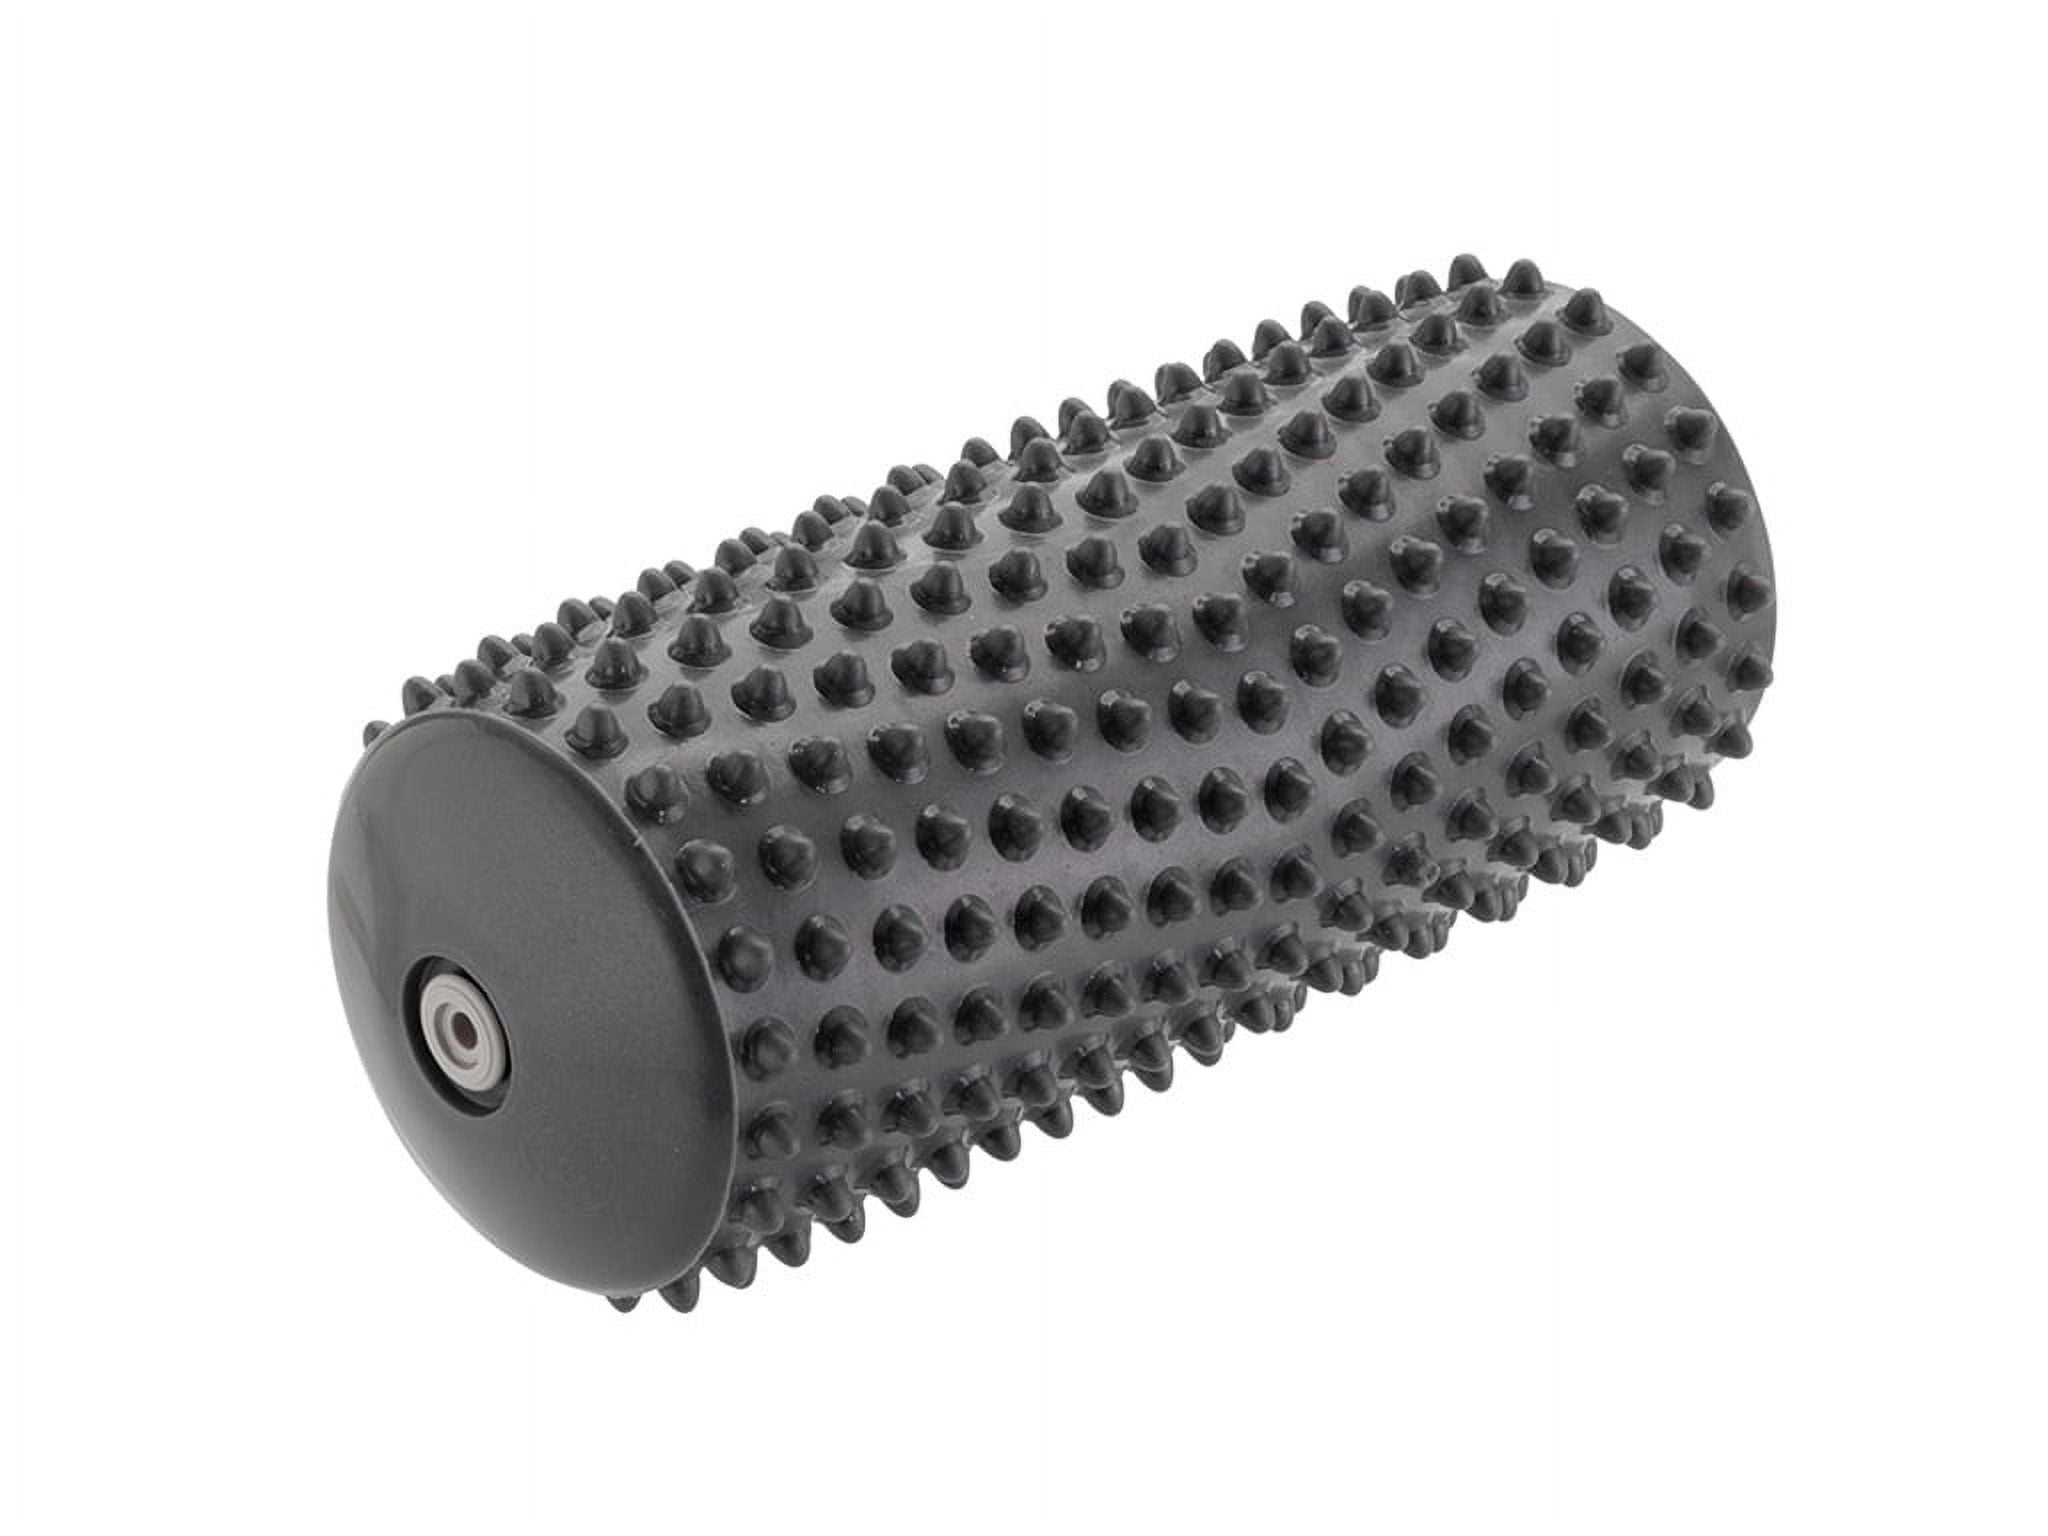  Vive Foam Roller - 12 Inch High Density Massage Stick for Back,  Firm Trigger Point, Yoga, Physical Therapy and Exercise - Long Round  Massager for Leg, Calf, Deep Muscle Tissue Full